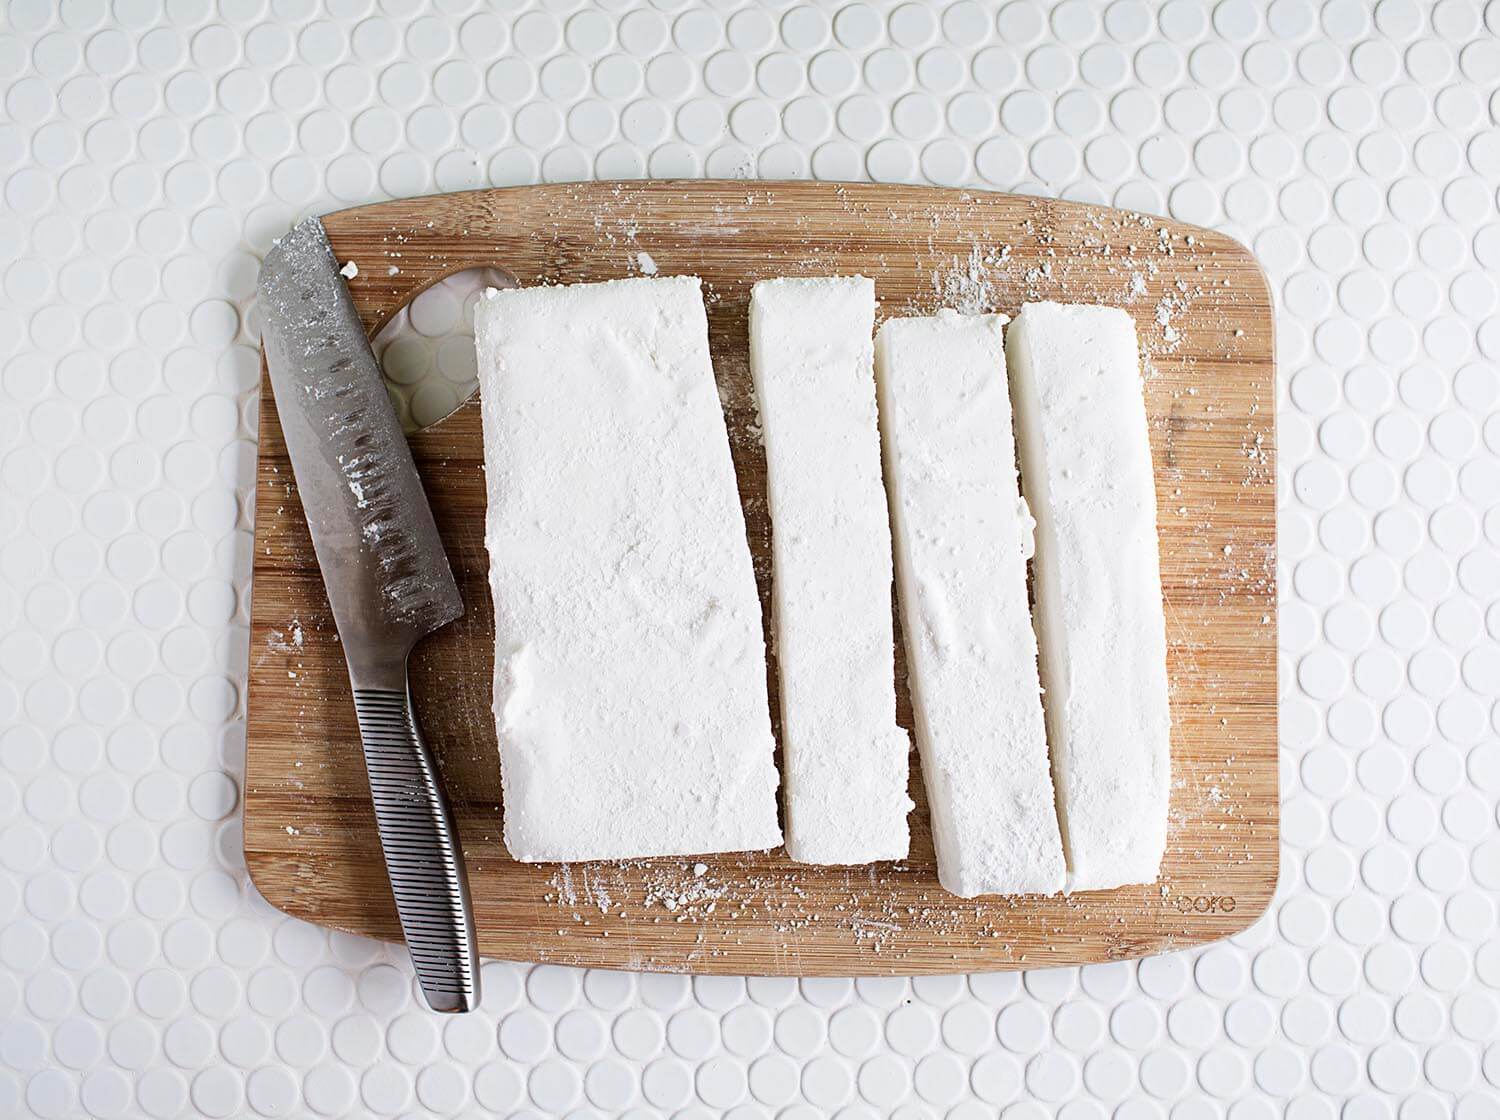 How to make marshmallows at home